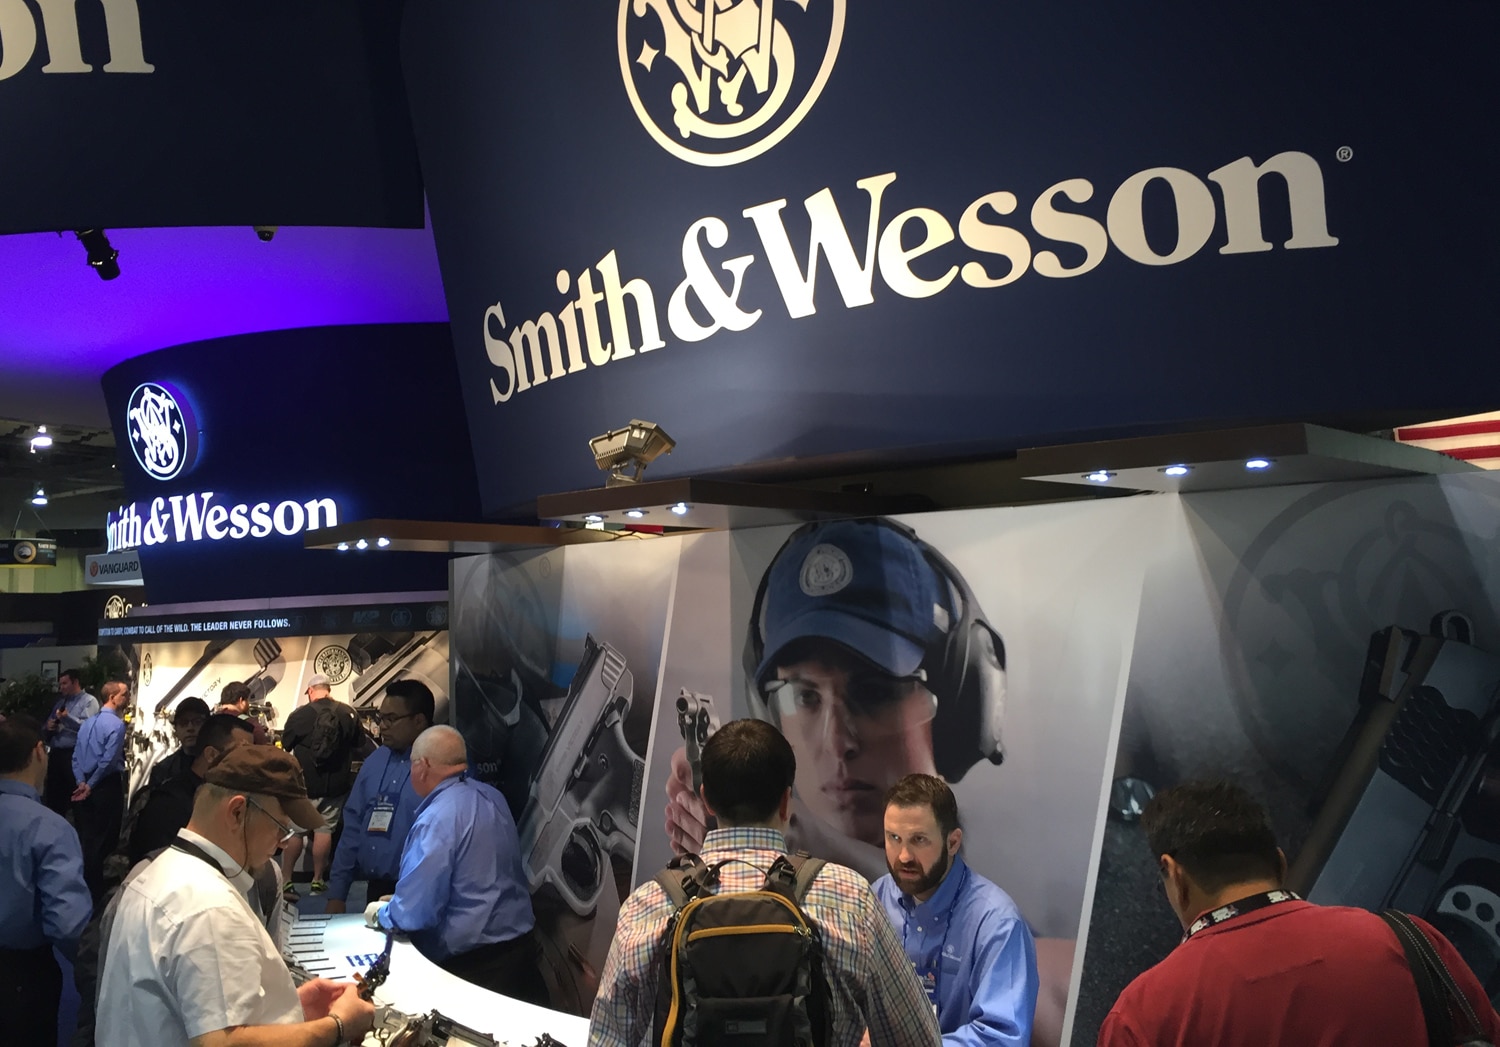 Representatives and patrons talking at the Smith & Wesson booth during SHOT Show in January 2016. (Photo: Daniel Terrill)